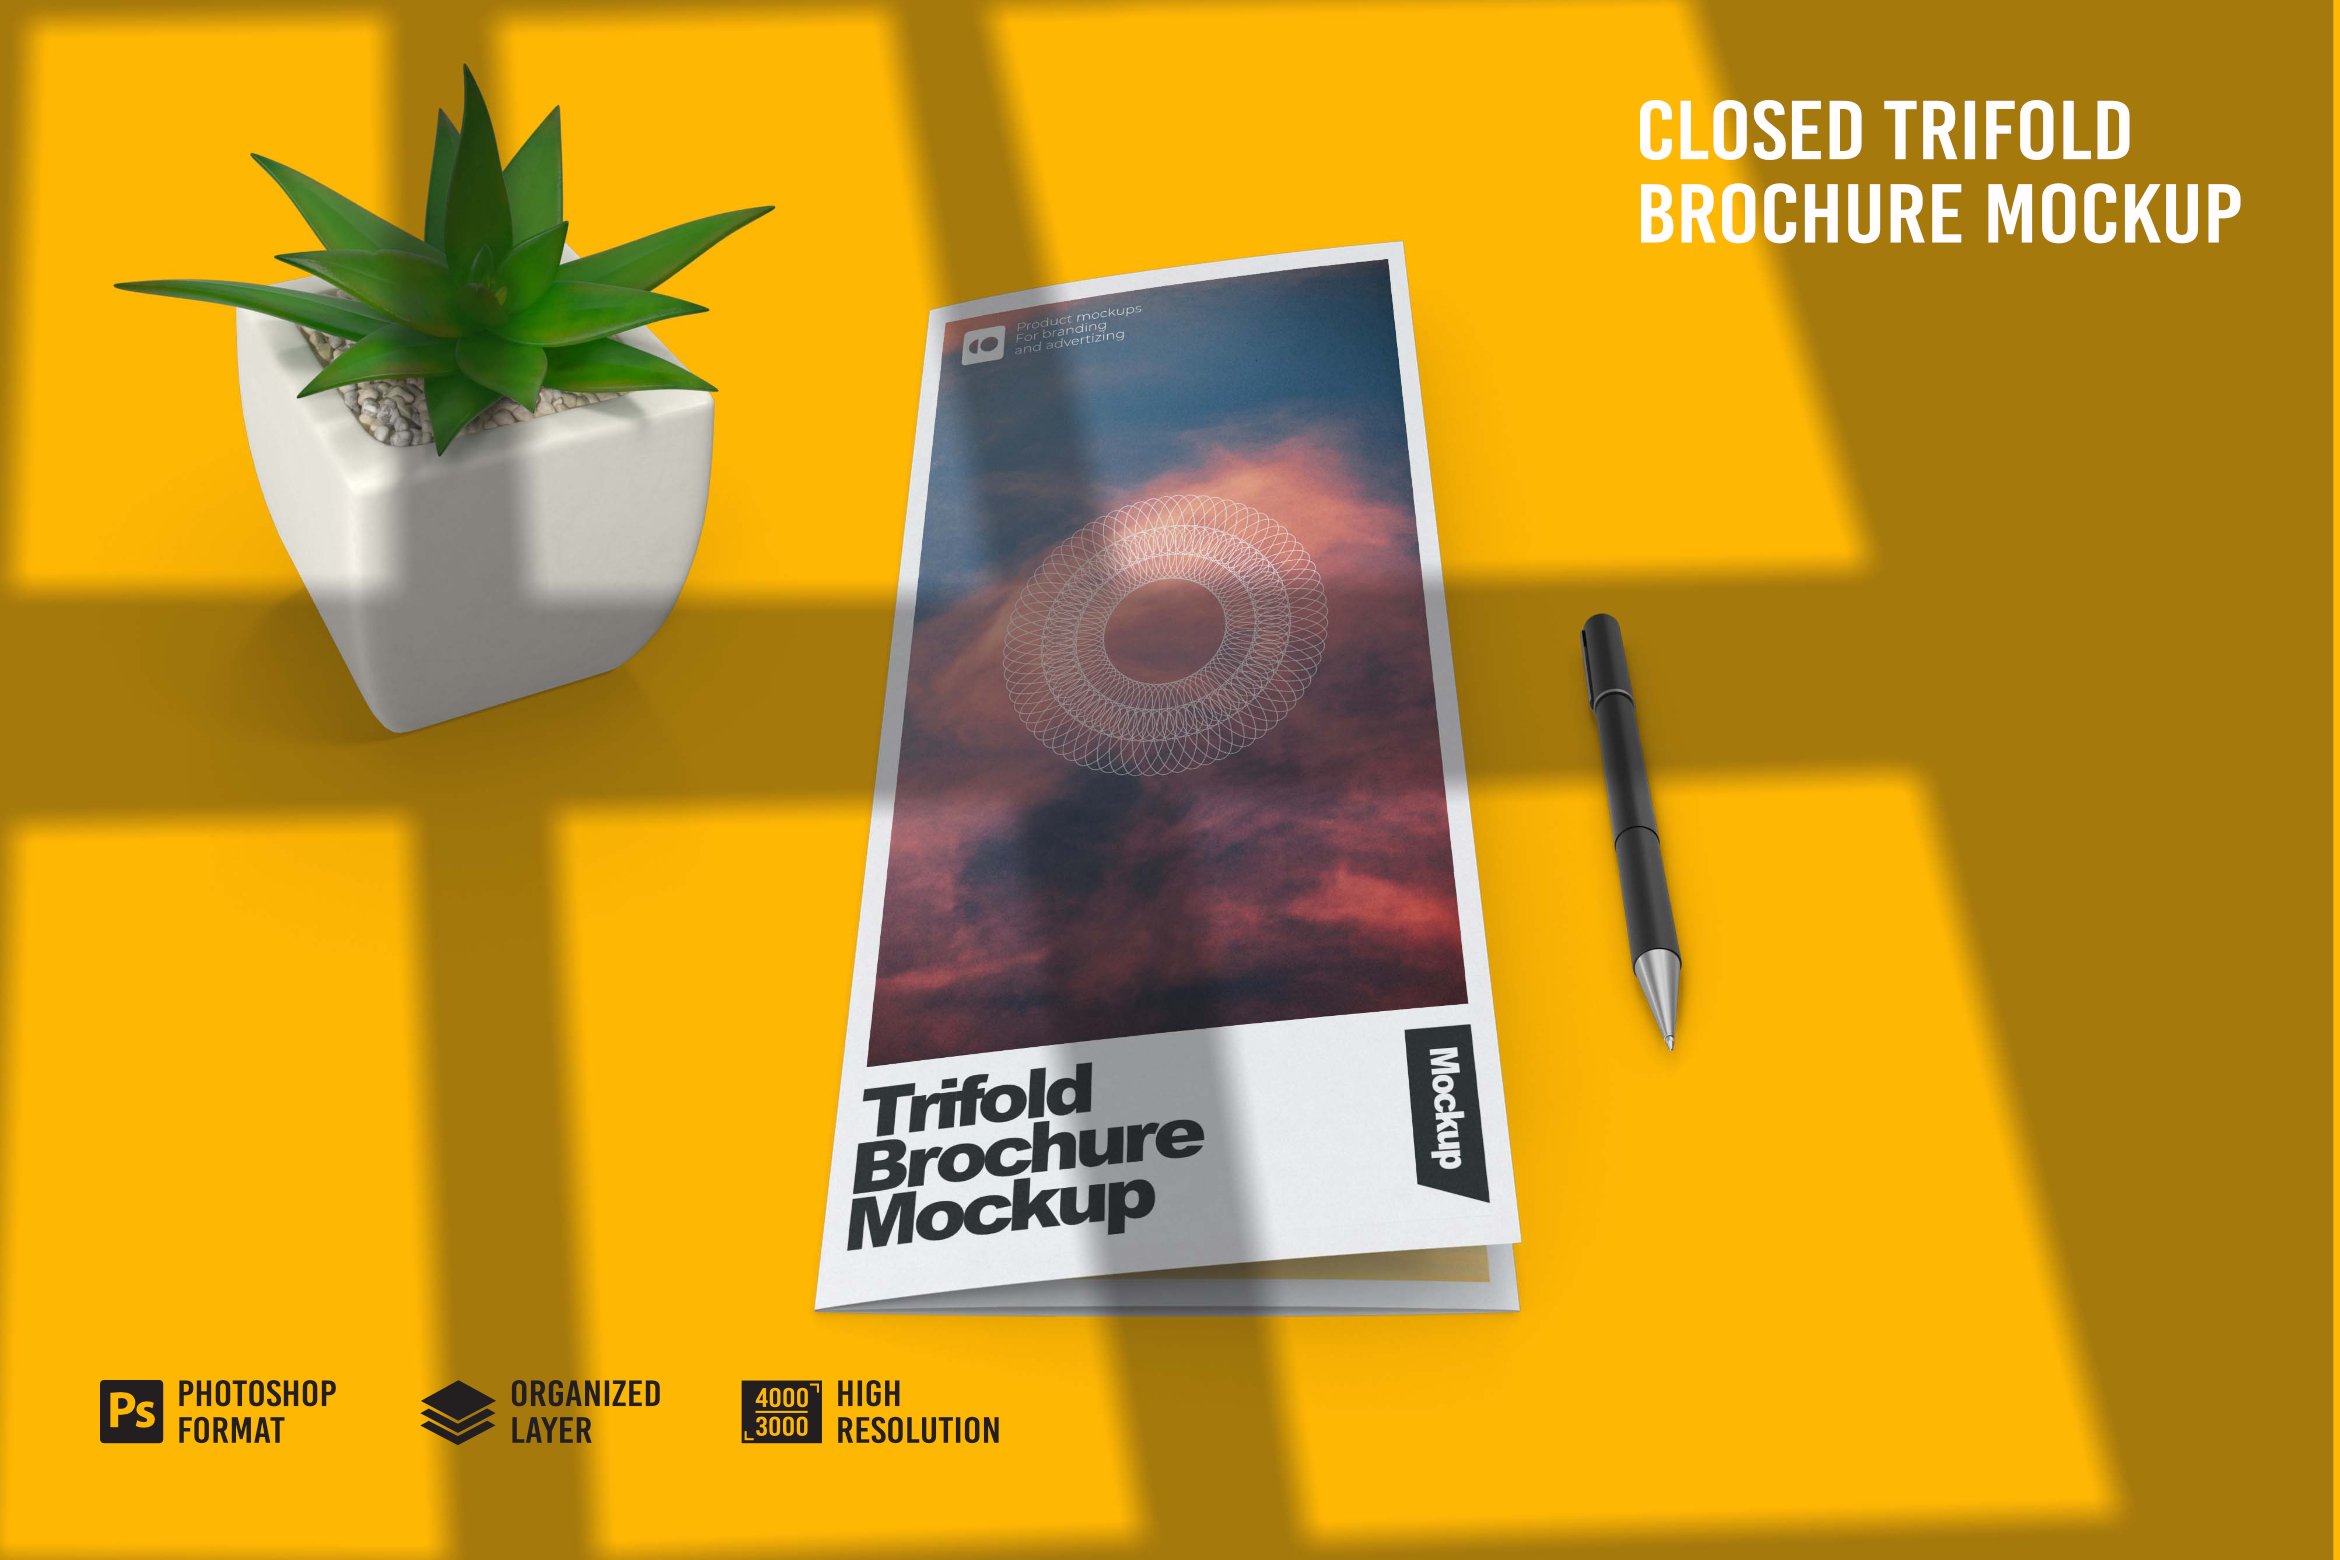 Closed Trifold Brochure Mockup cover image.